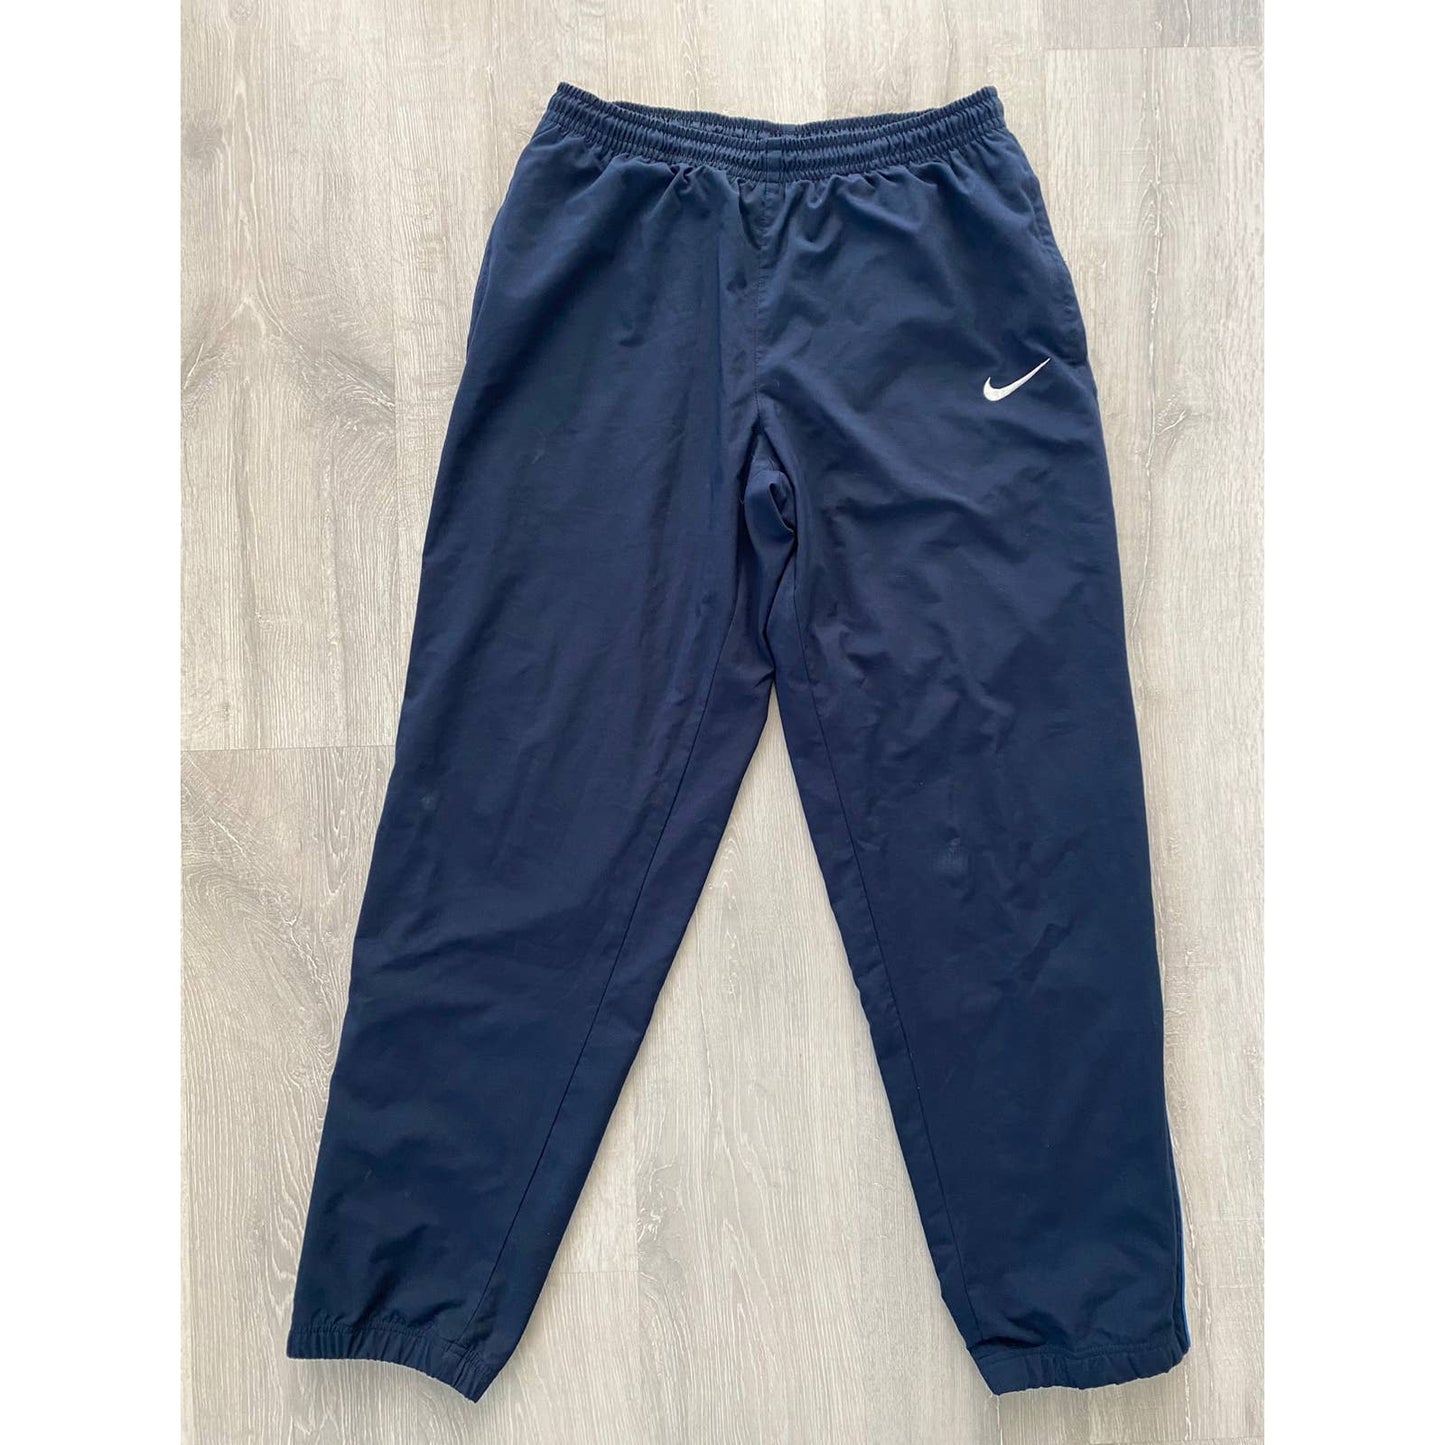 Nike vintage black blue track pants small swoosh 2000s – Refitted